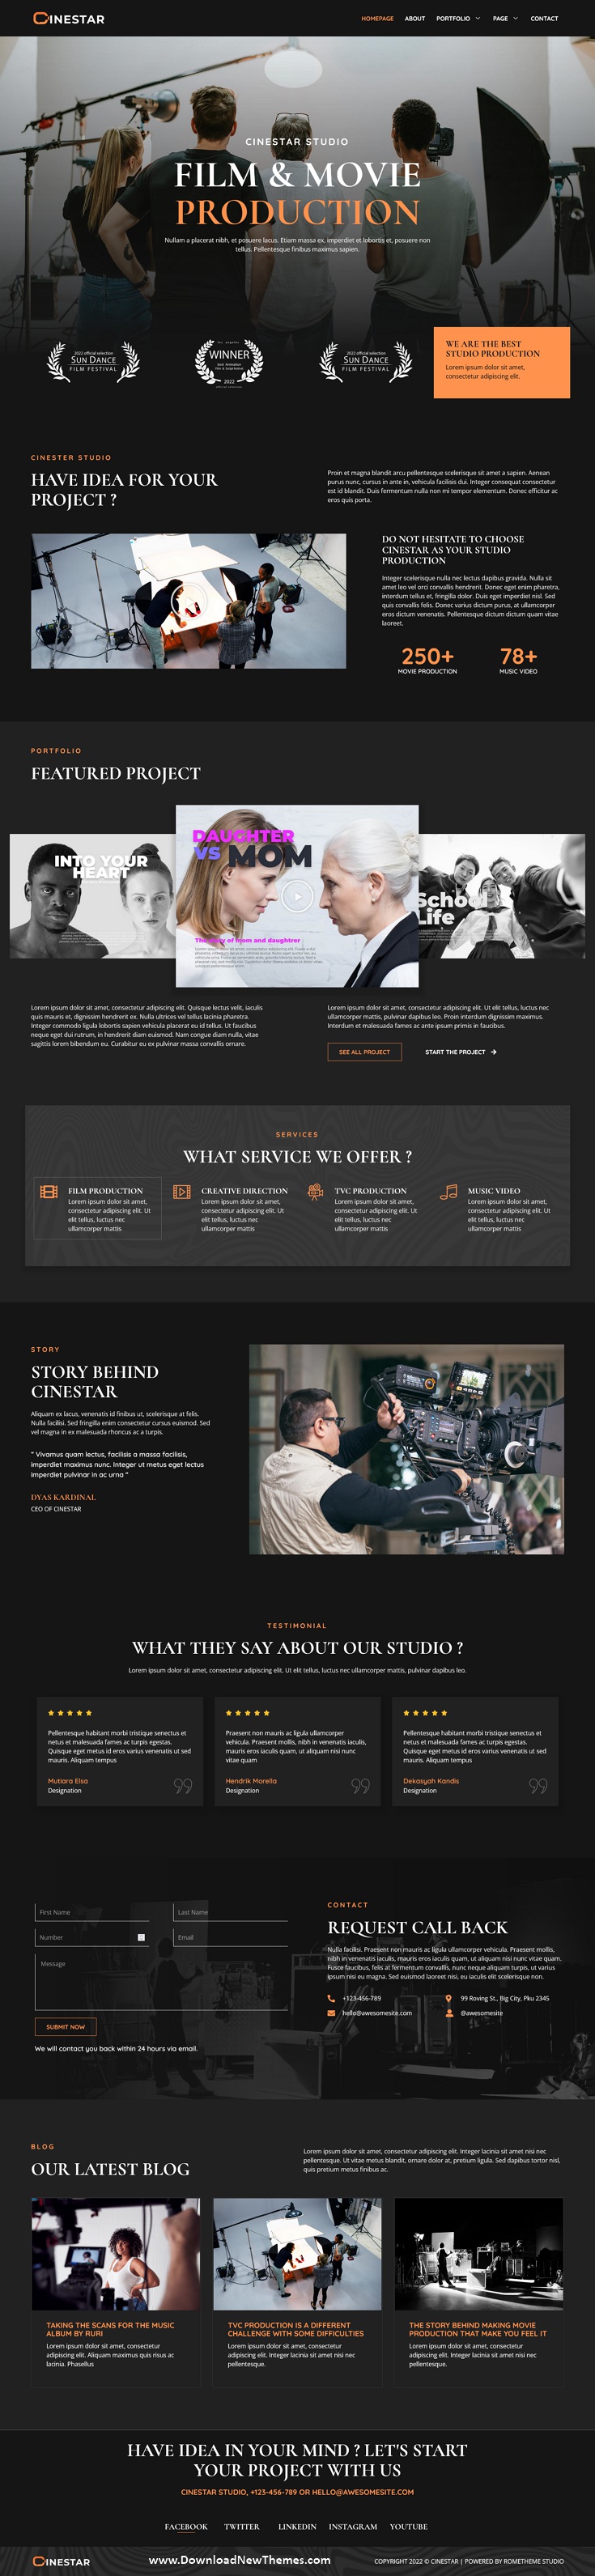 Cinestar - Film & Video Production Elementor Template Kit Review